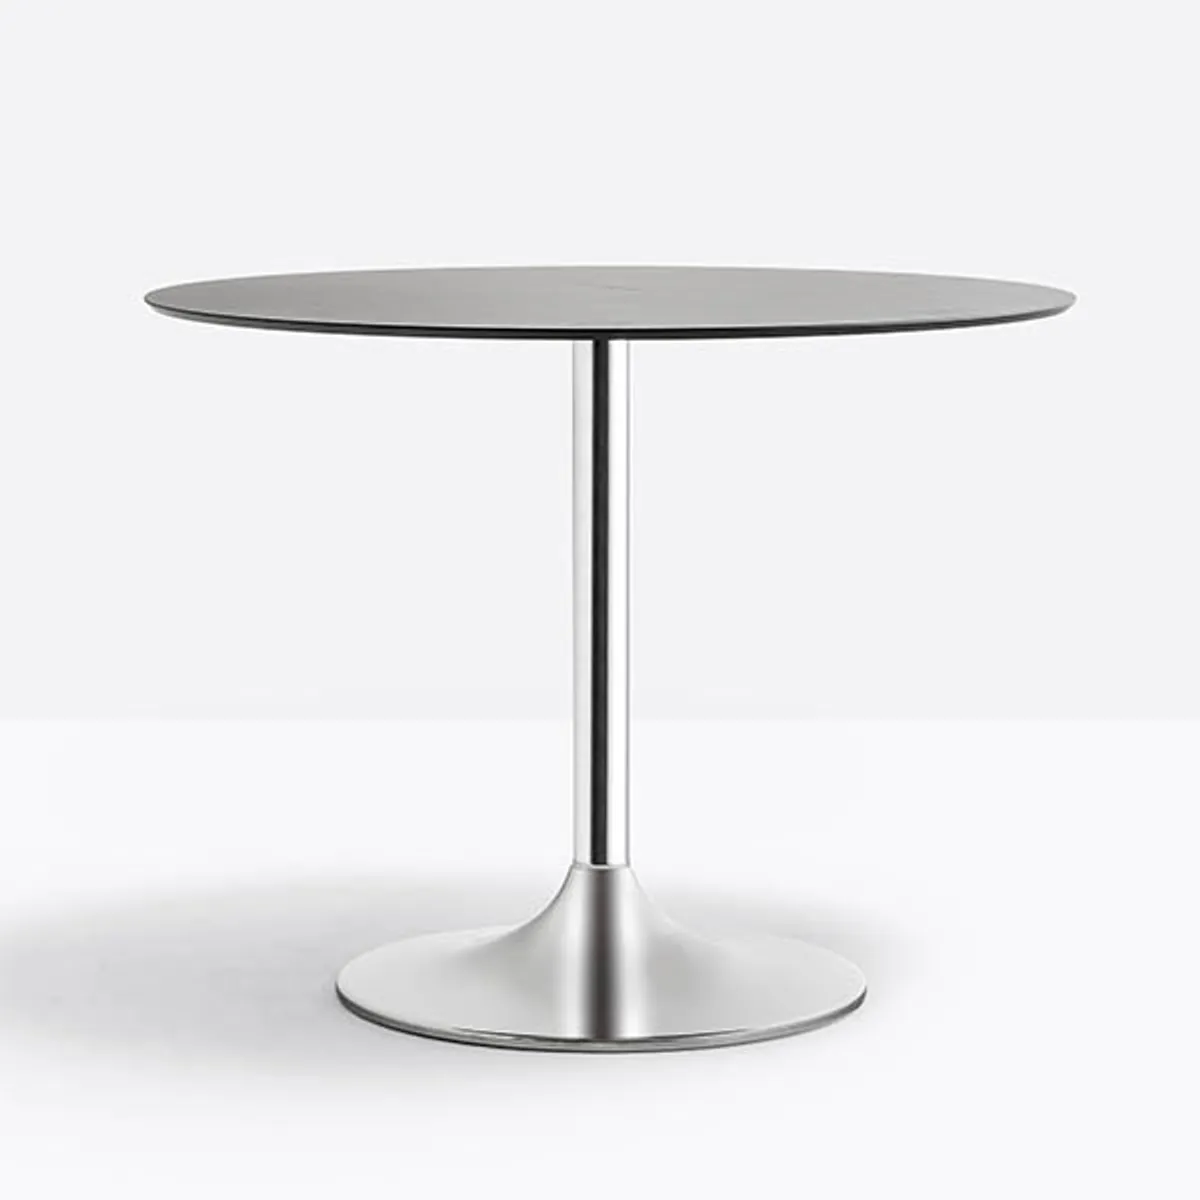 Candy Bar Round Tablebase Diningheight 4843 Cr